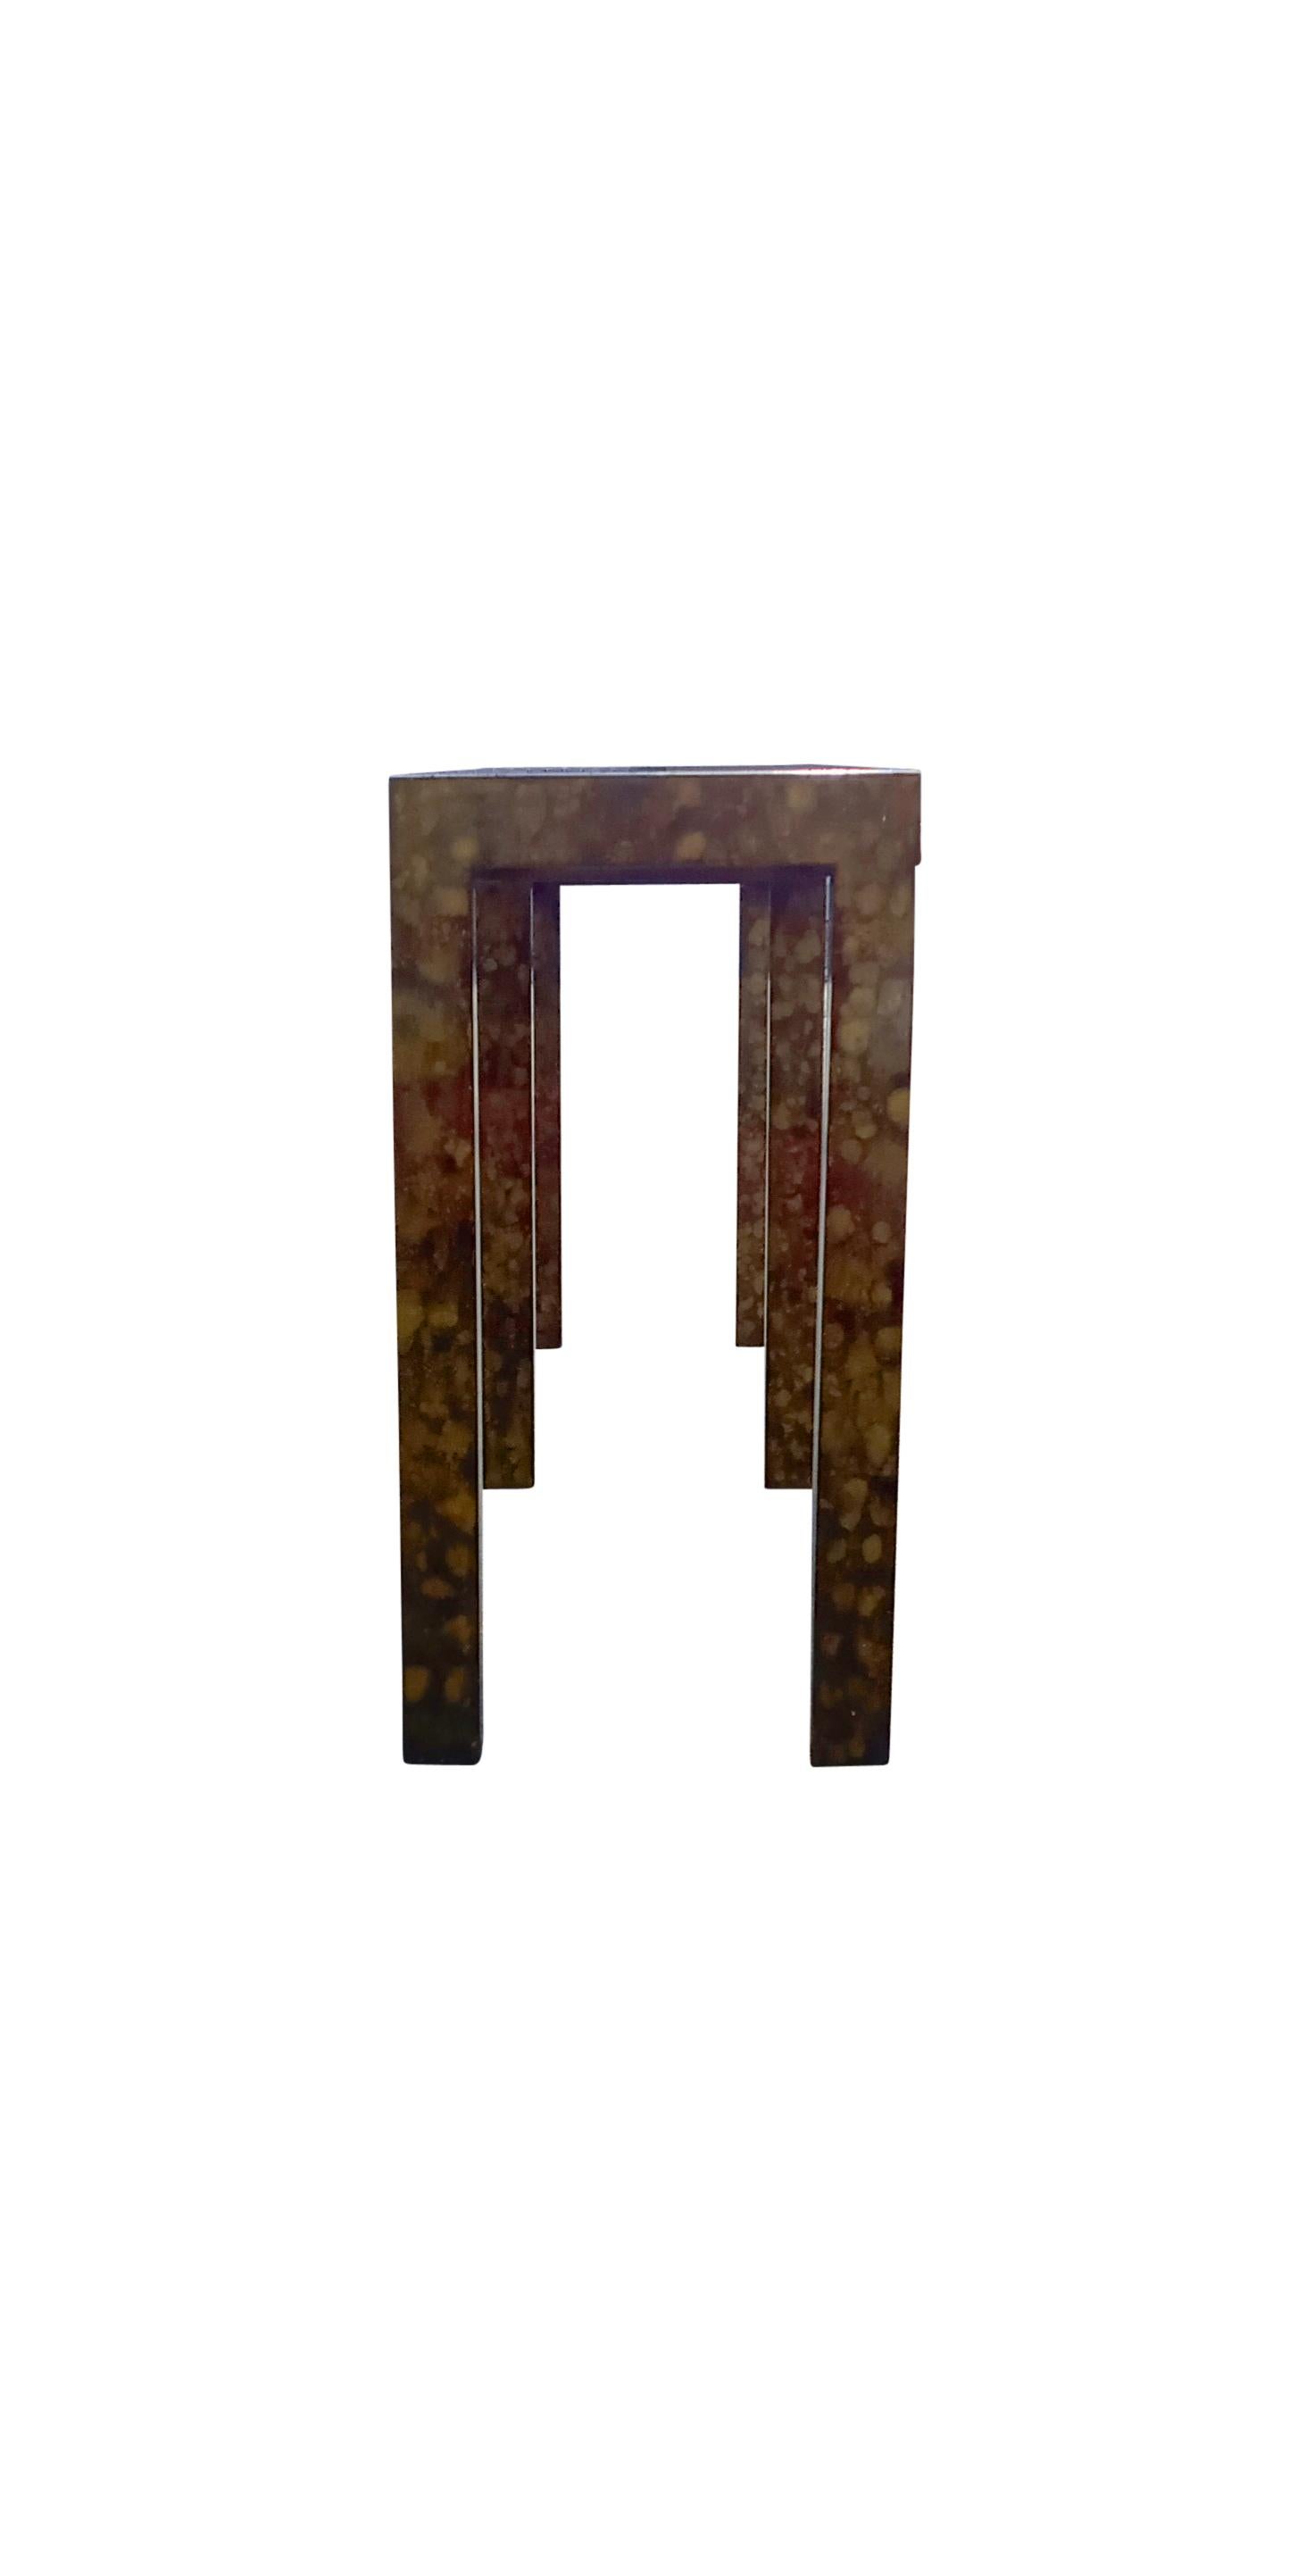 Late 20th Century 1970s Oil Drop Finish Tall Long Narrow Parsons Console Table by Directional